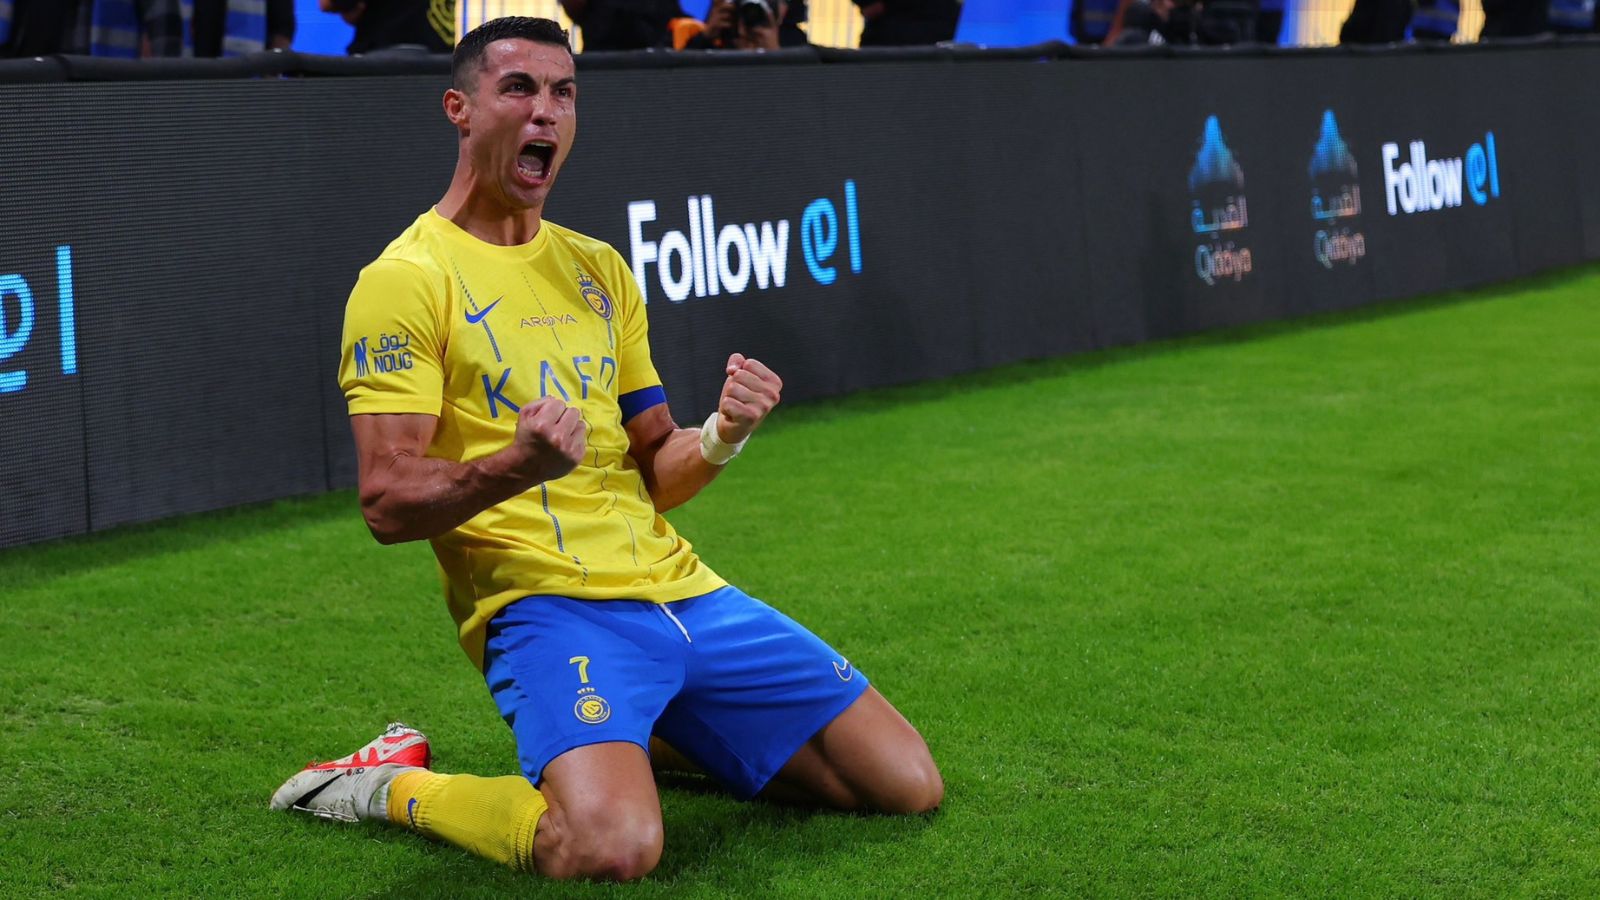  Cristiano Ronaldo is on his knees celebrating a goal with his arms in the air and mouth open.